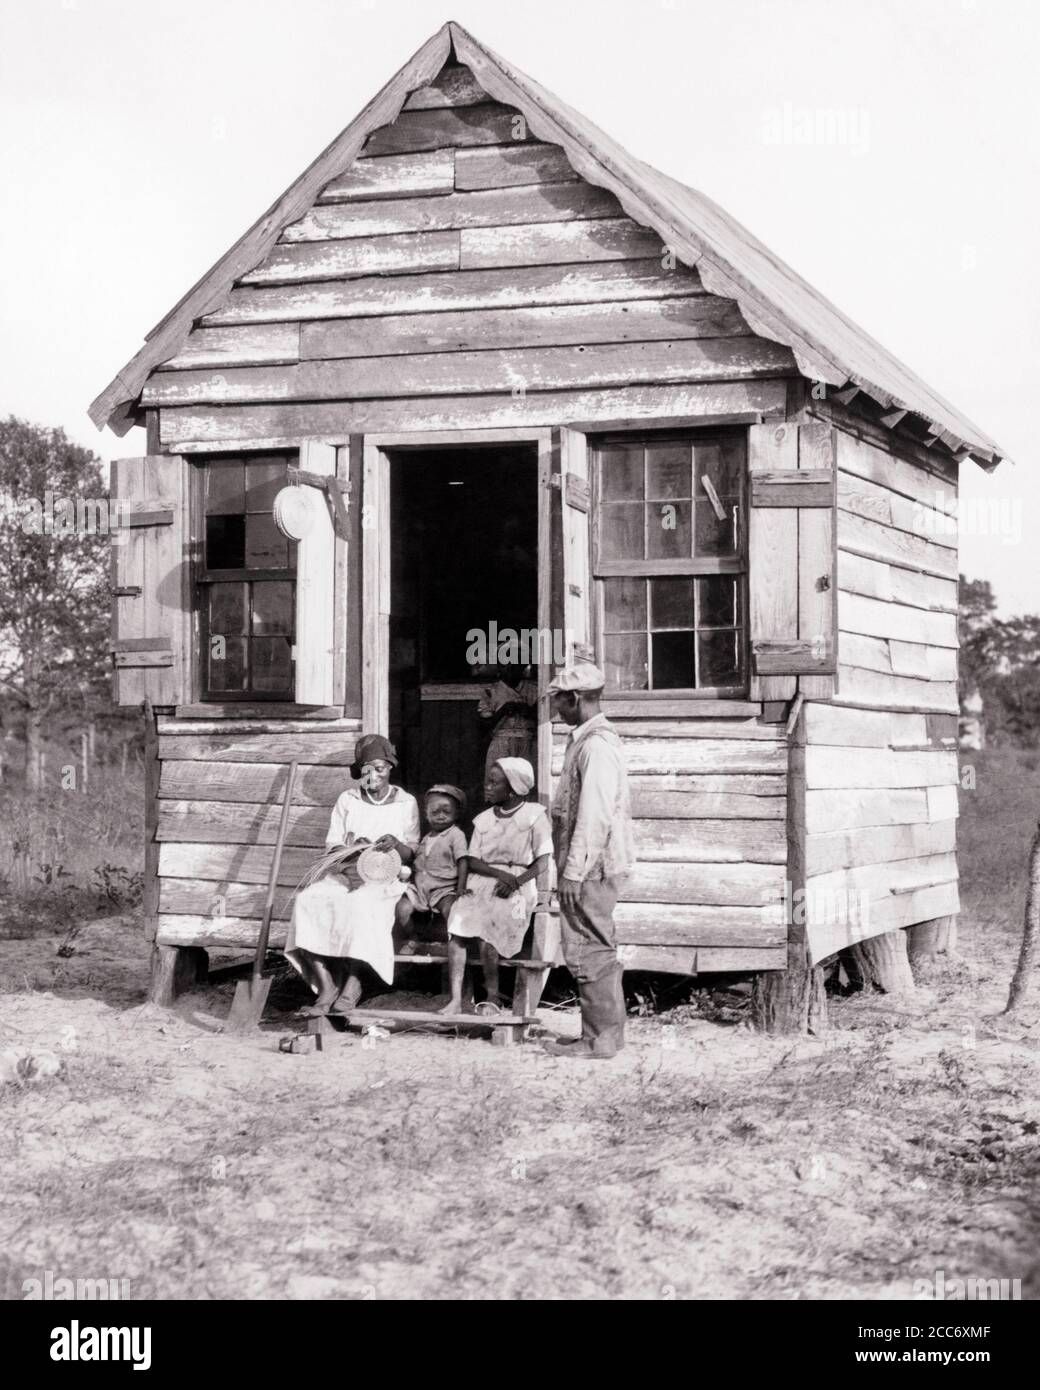 1930s 1940s AFRICAN-AMERICAN GULLAH FAMILY SITTING ON STEPS SMALL SHACK GRANDMOTHER WEAVING SWEETGRASS BASKET SOUTH CAROLINA USA - n1205 HAR001 HARS COMMUNITY STEPS GRANDMOTHER OLD TIME BUSY NOSTALGIA OLD FASHION 1 JUVENILE YOUNG ADULT SONS GRANDPARENTS FAMILIES LIFESTYLE CELEBRATION FEMALES HOUSES MARRIED GRANDPARENT RURAL SPOUSE HUSBANDS UNITED STATES COPY SPACE FULL-LENGTH LADIES PERSONS TRADITIONAL RESIDENTIAL UNITED STATES OF AMERICA MALES BUILDINGS CRAFT SPIRITUALITY B&W PARTNER SADNESS TODDLERS NORTH AMERICA NORTH AMERICAN SOUVENIR STRENGTH CUSTOMER SERVICE AFRICAN-AMERICANS Stock Photo